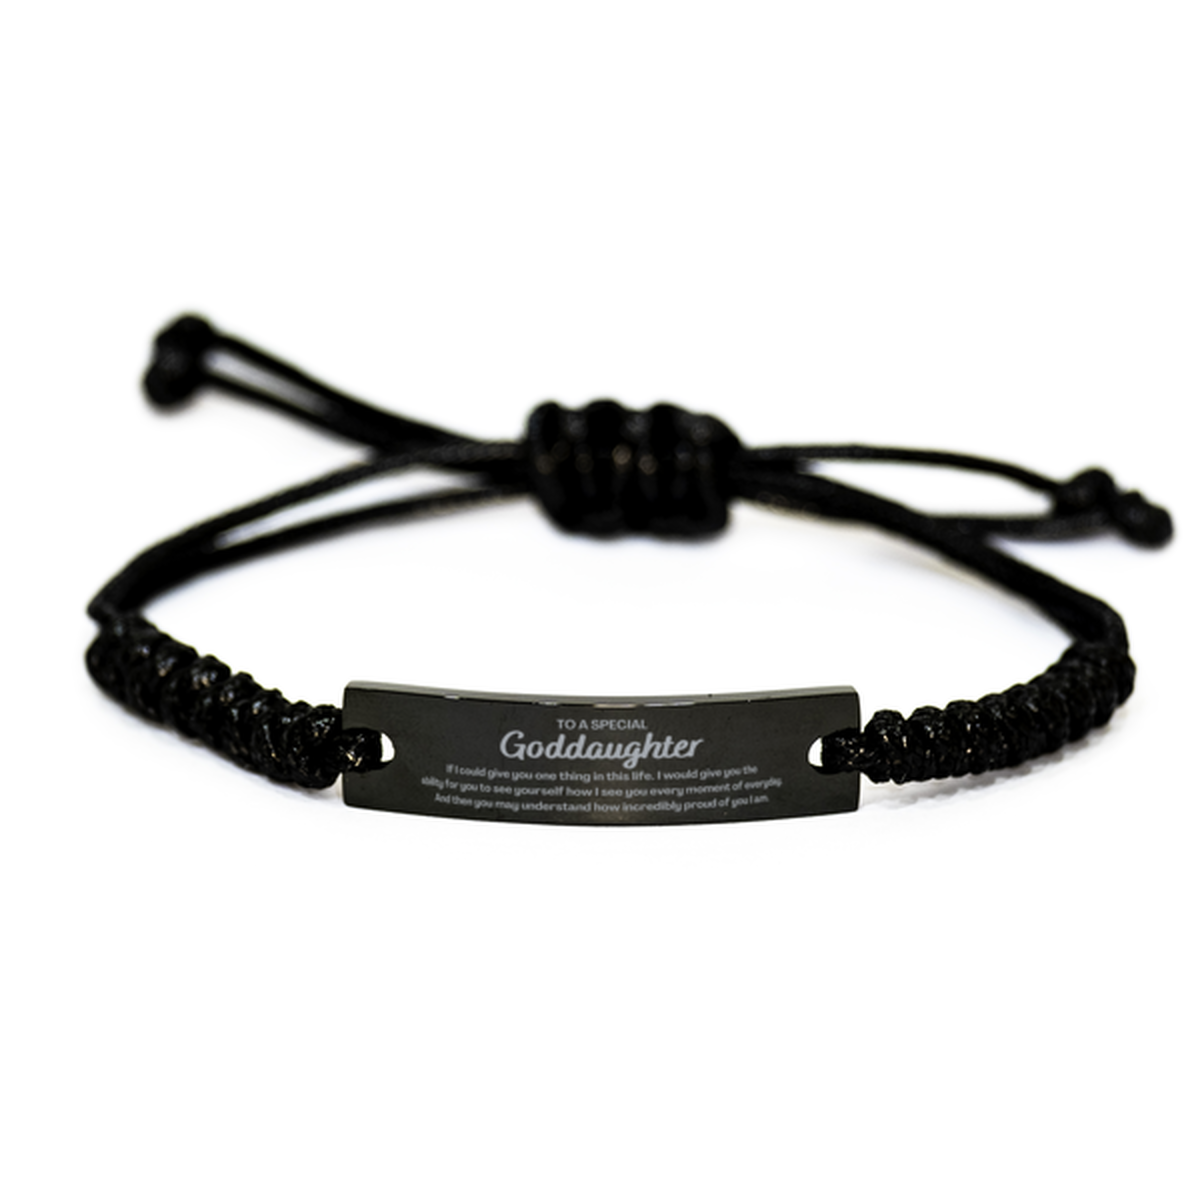 To My Goddaughter Black Rope Bracelet, Gifts For Goddaughter Engraved, Inspirational Gifts for Christmas Birthday, Epic Gifts for Goddaughter To A Special Goddaughter how incredibly proud of you I am